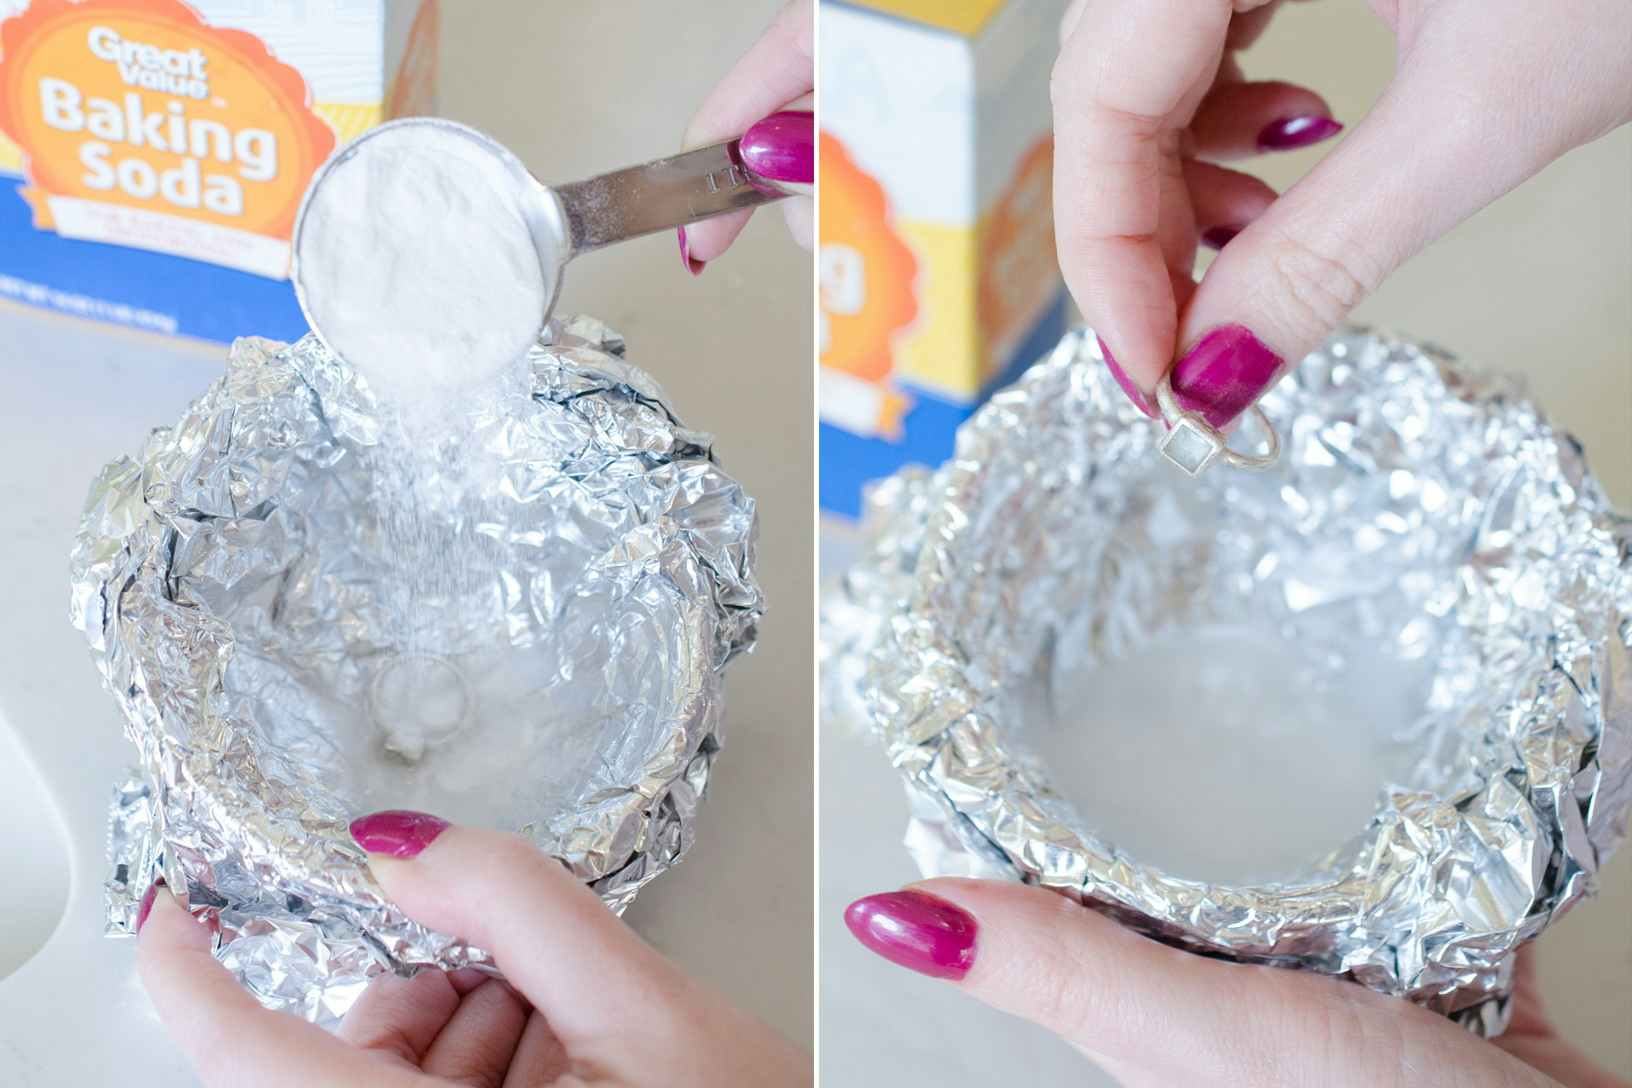 A person making a DIY cleaner with baking soda and foil